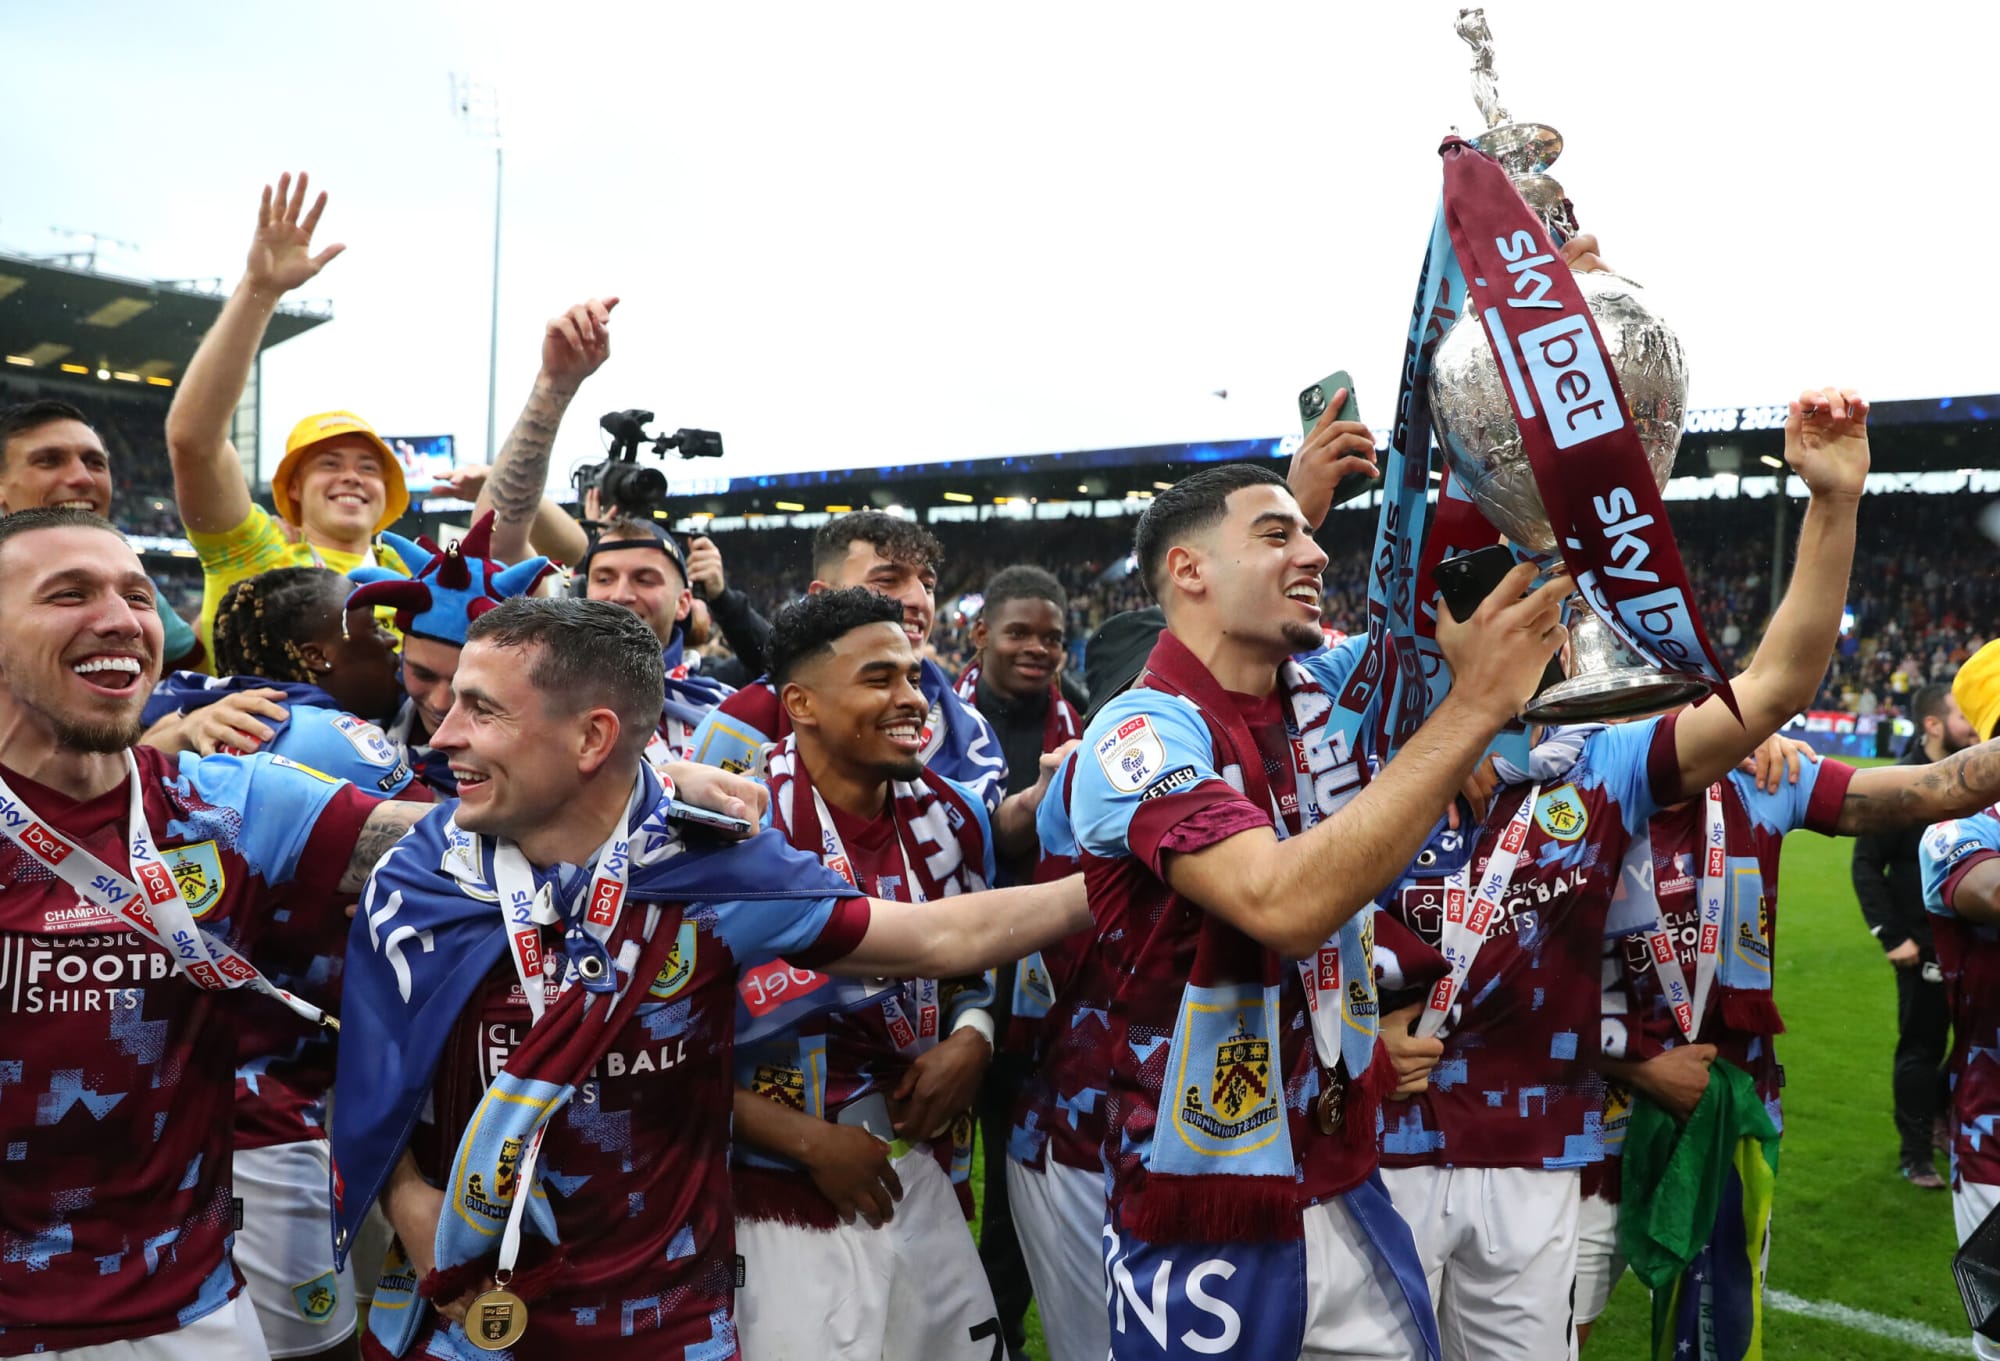 Vincent Kompany’s Burnley will look to be the surprise team next season